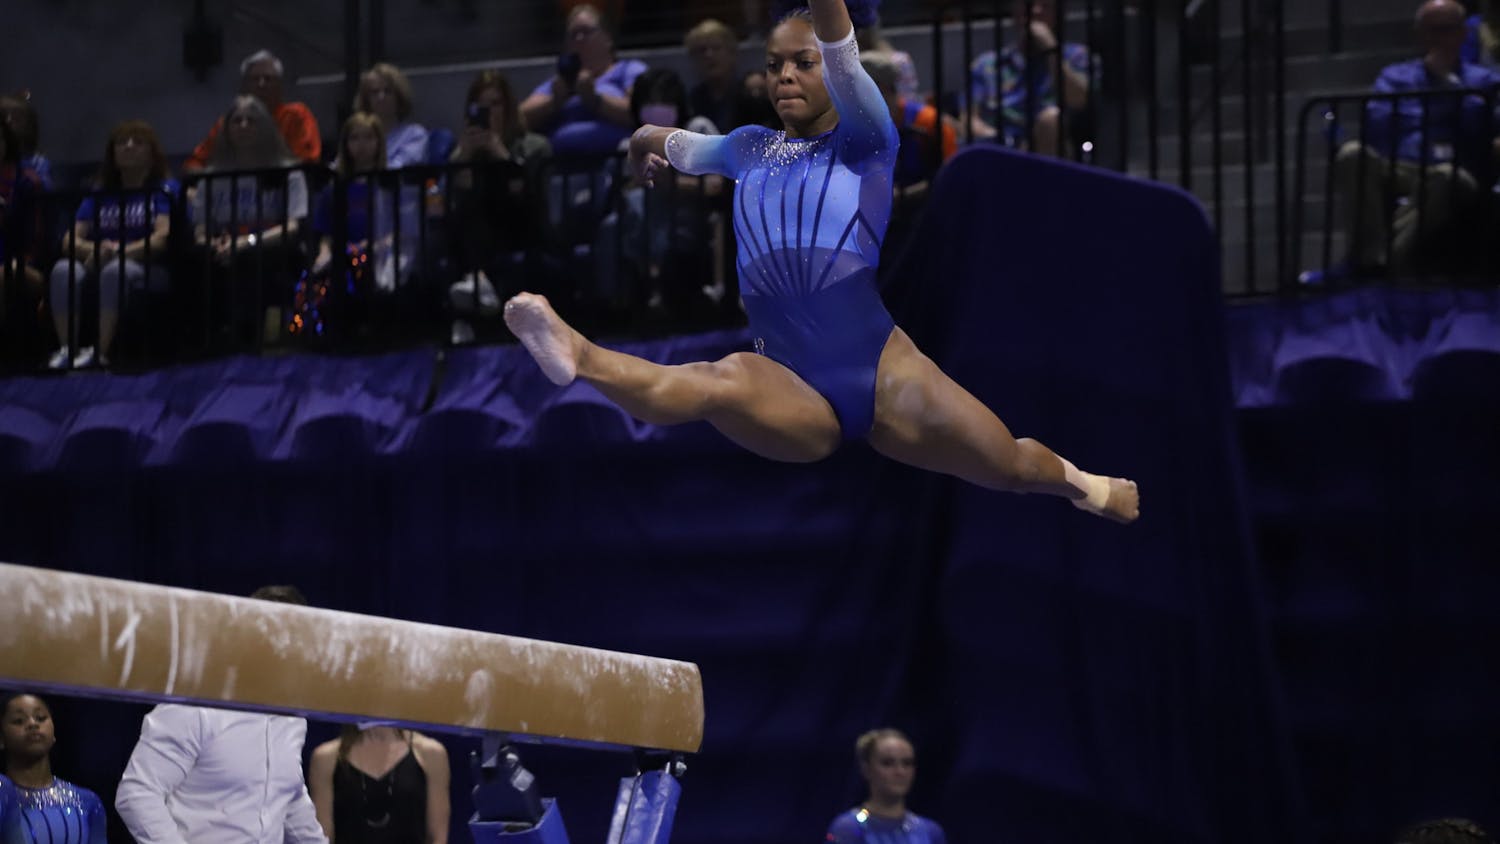 Senior Trinity Thomas earned her 12th perfect score during the National Championship Final Saturday afternoon. The No. 2 Gators fell to the No. 1 Oklahoma Sooners.